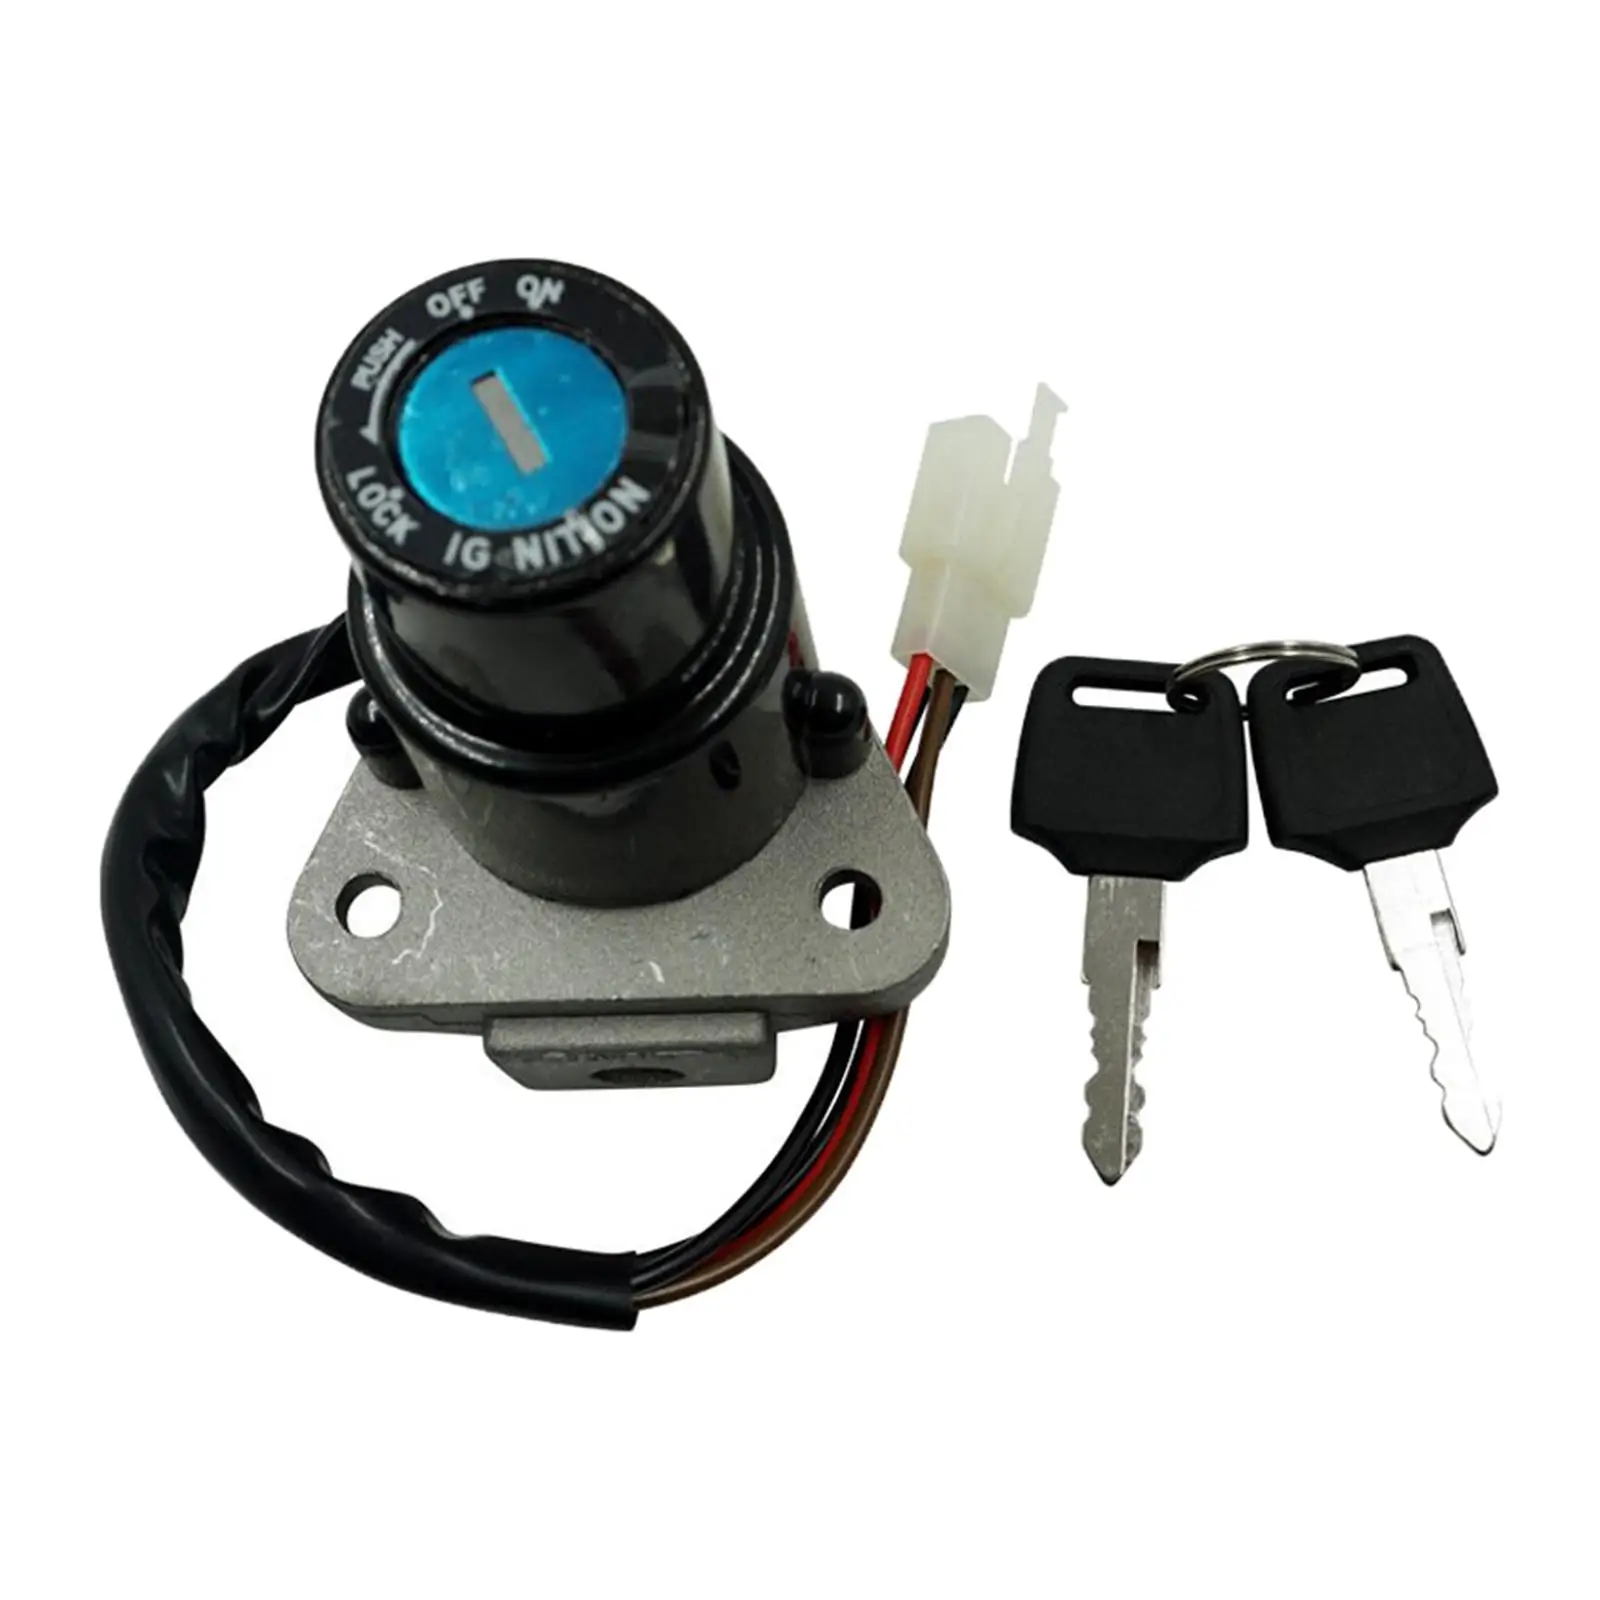 Motorbike Ignition Switch Key Replacement Fit for DT125 XT225 Tzr250